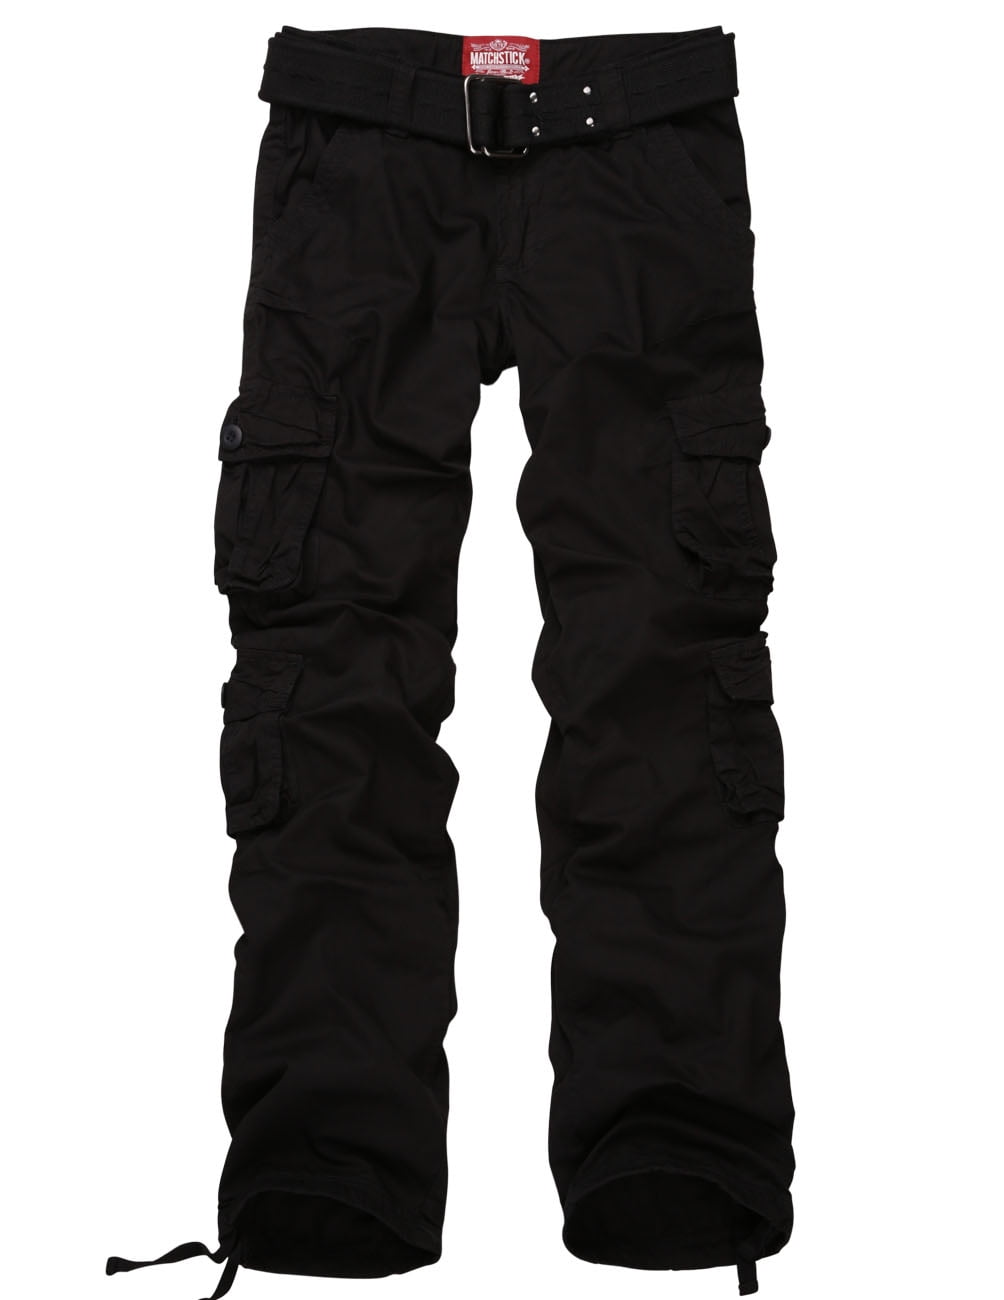 Matchstick Women Cargo Pants Casual Solid Trousers with Pockets ...